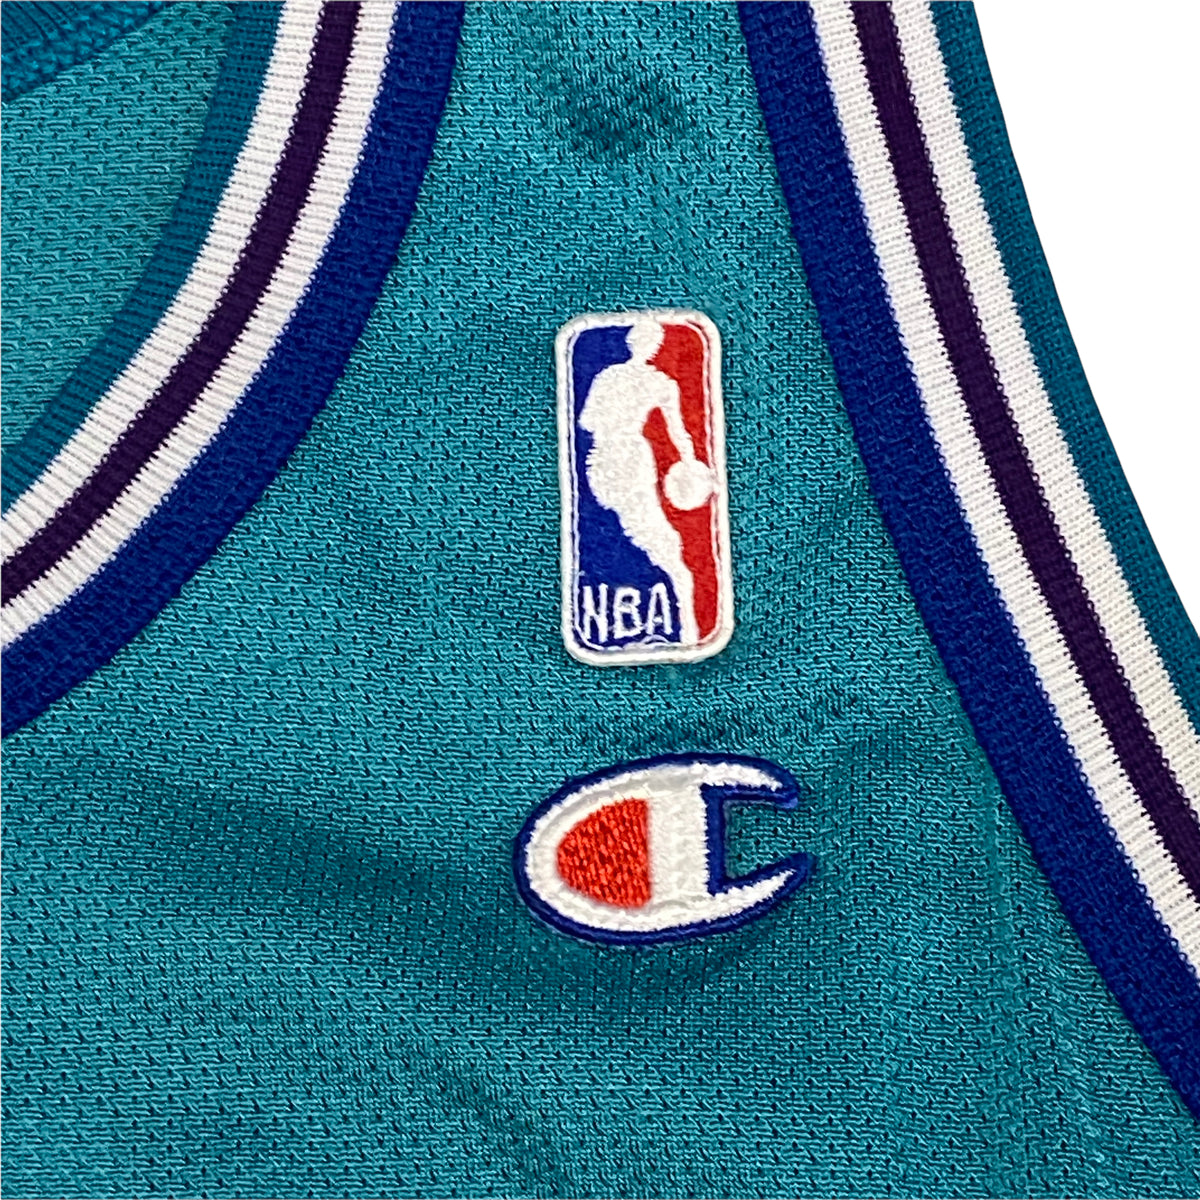 Vintage Alonzo Mourning Charlotte Hornets replica Champion jersey size 36